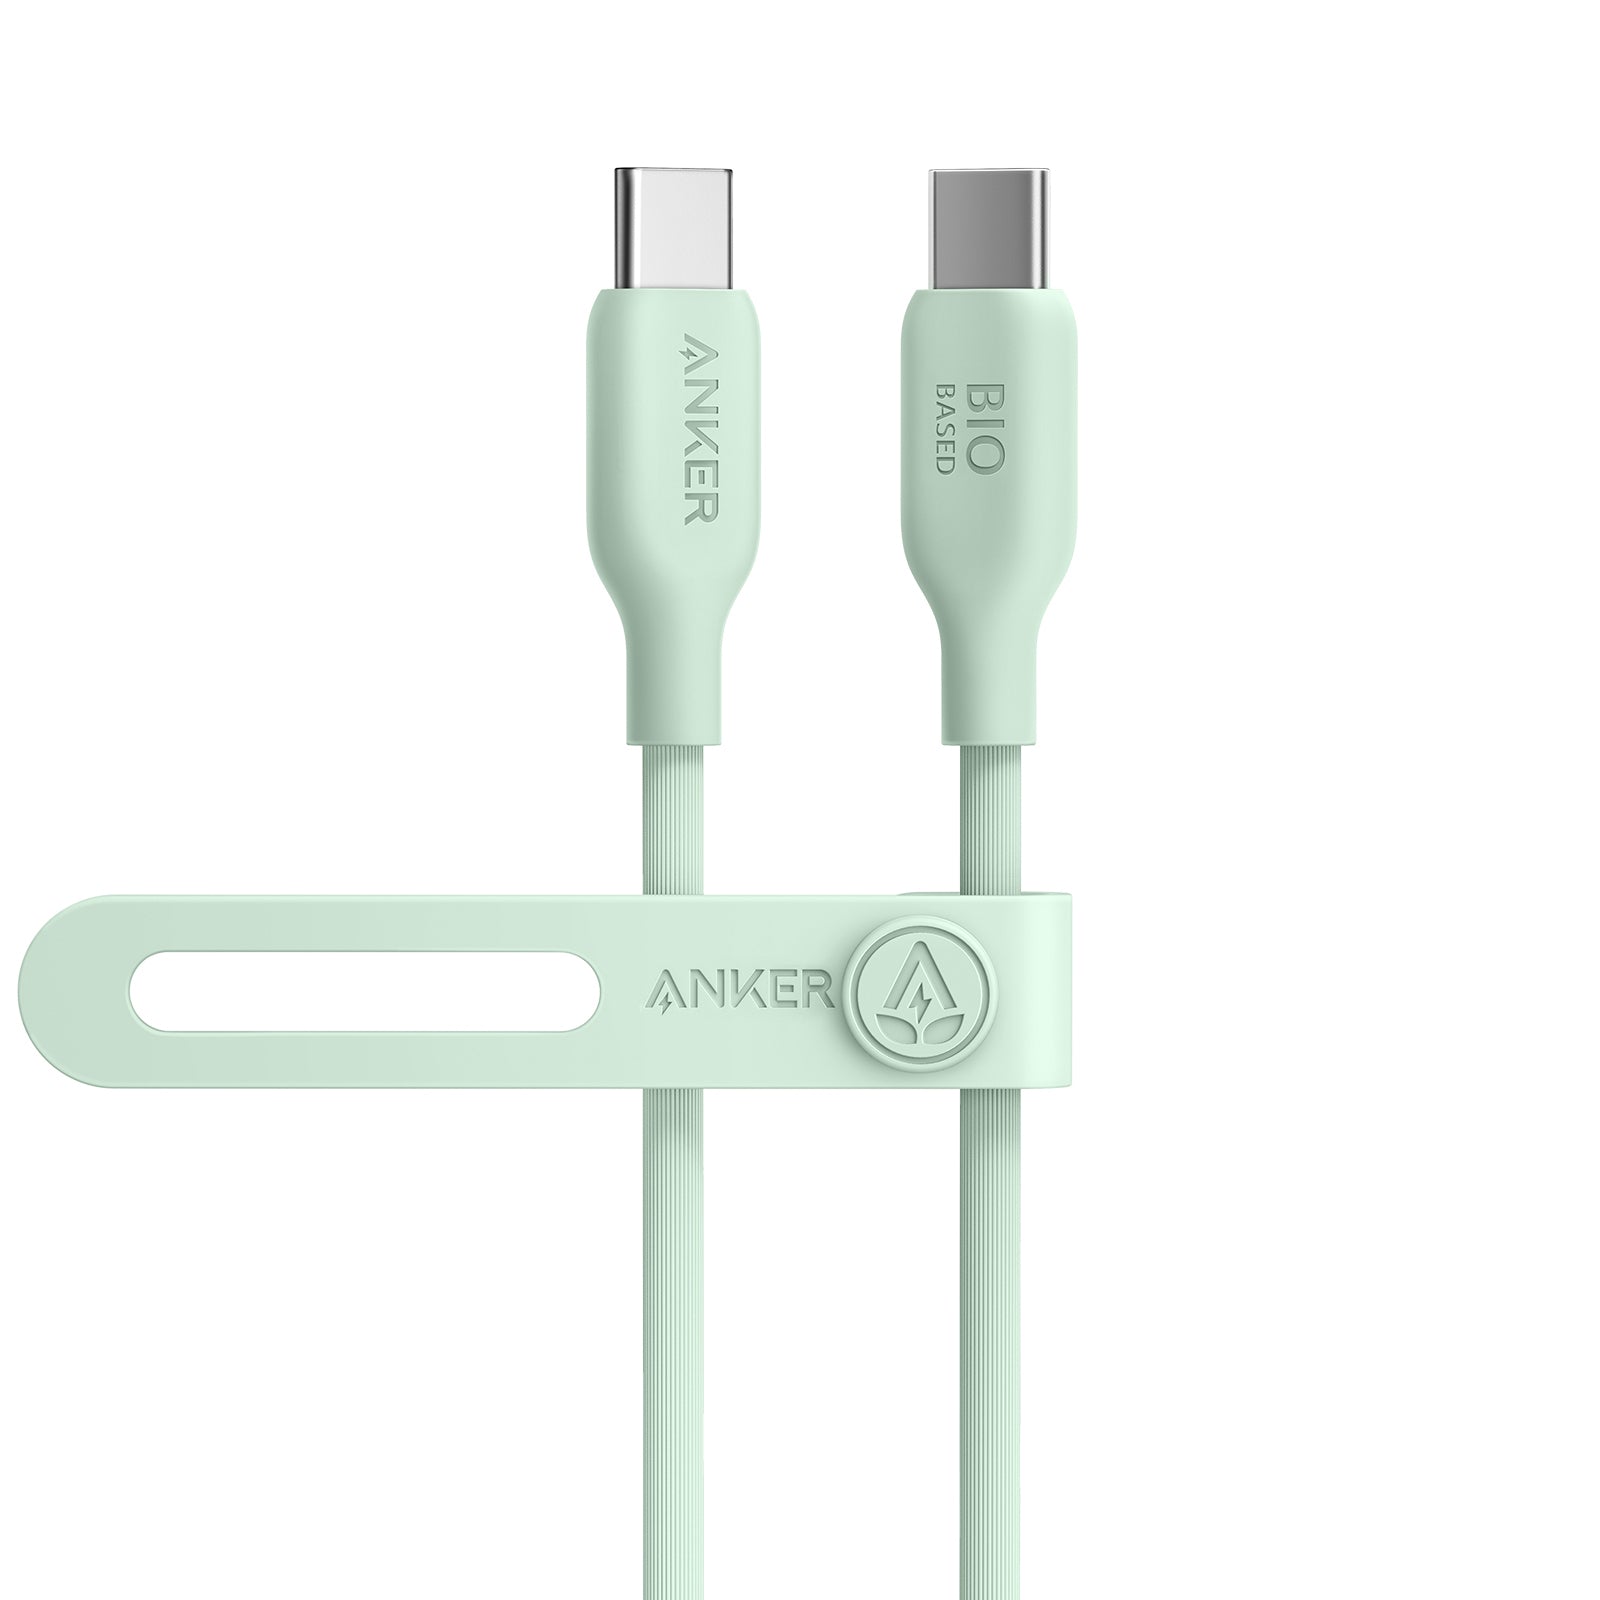 Anker 543 USB-C to USB-C 1.8m Charging Cable with 140W Charging Support (Eco Friendly) - Green